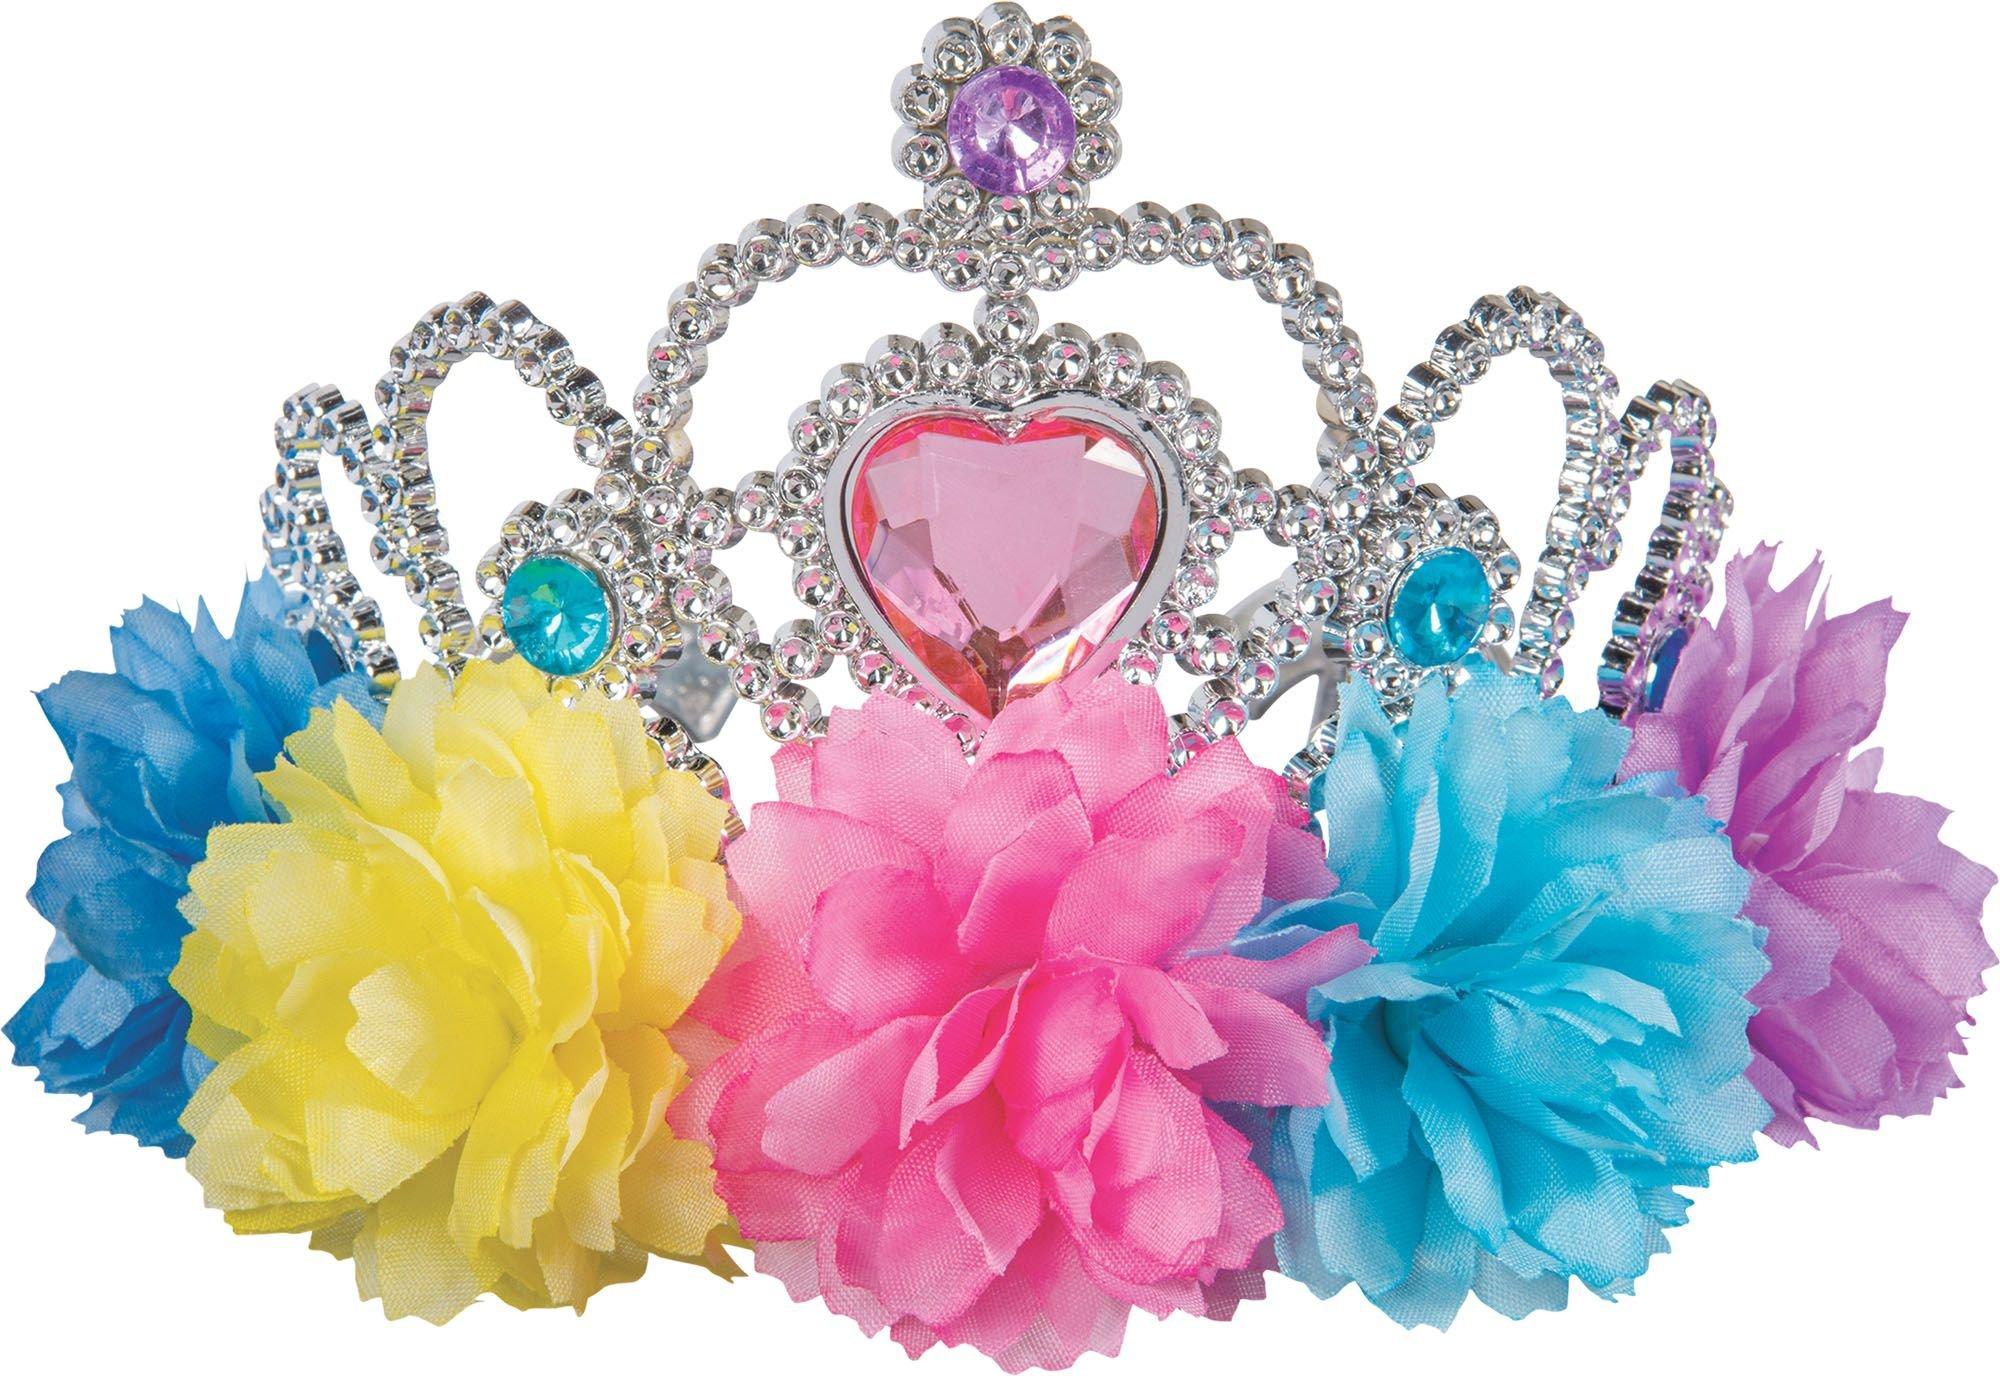 Pastel Party Floral Plastic & Fabric Tiara, 4in x 3.75in